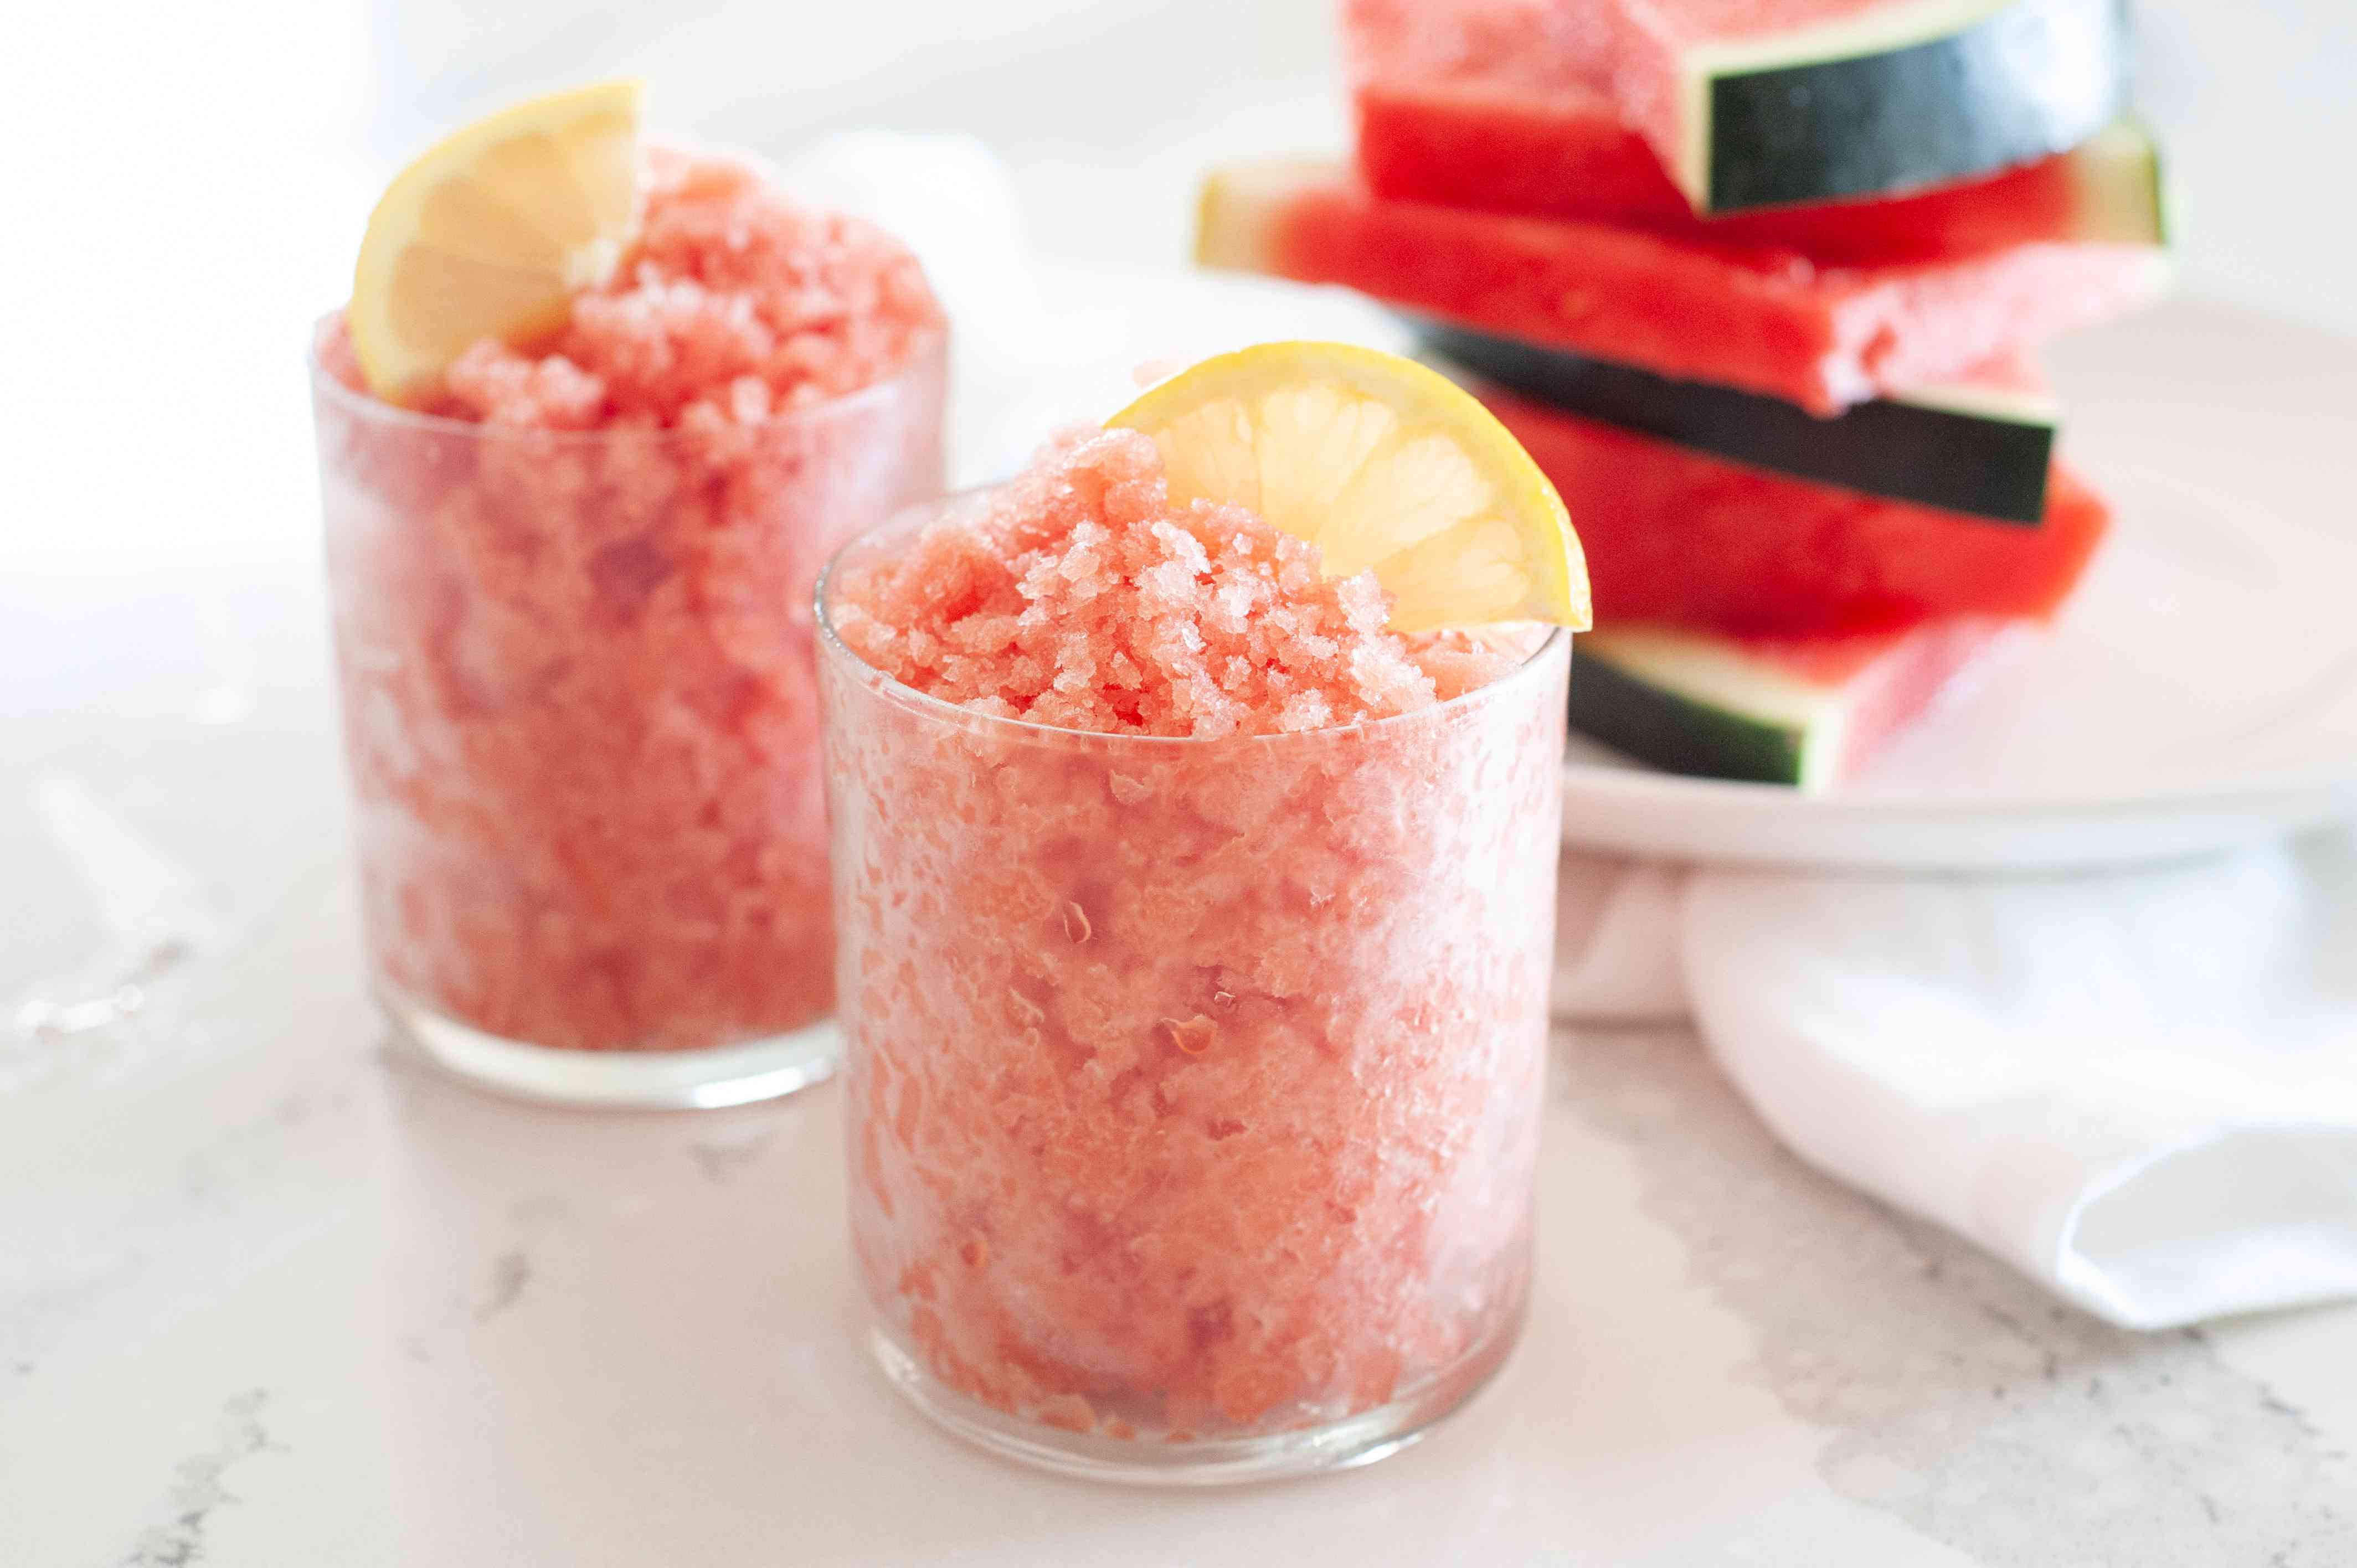 Side view of two glasses with watermelon granita and garnished with lemon slice.